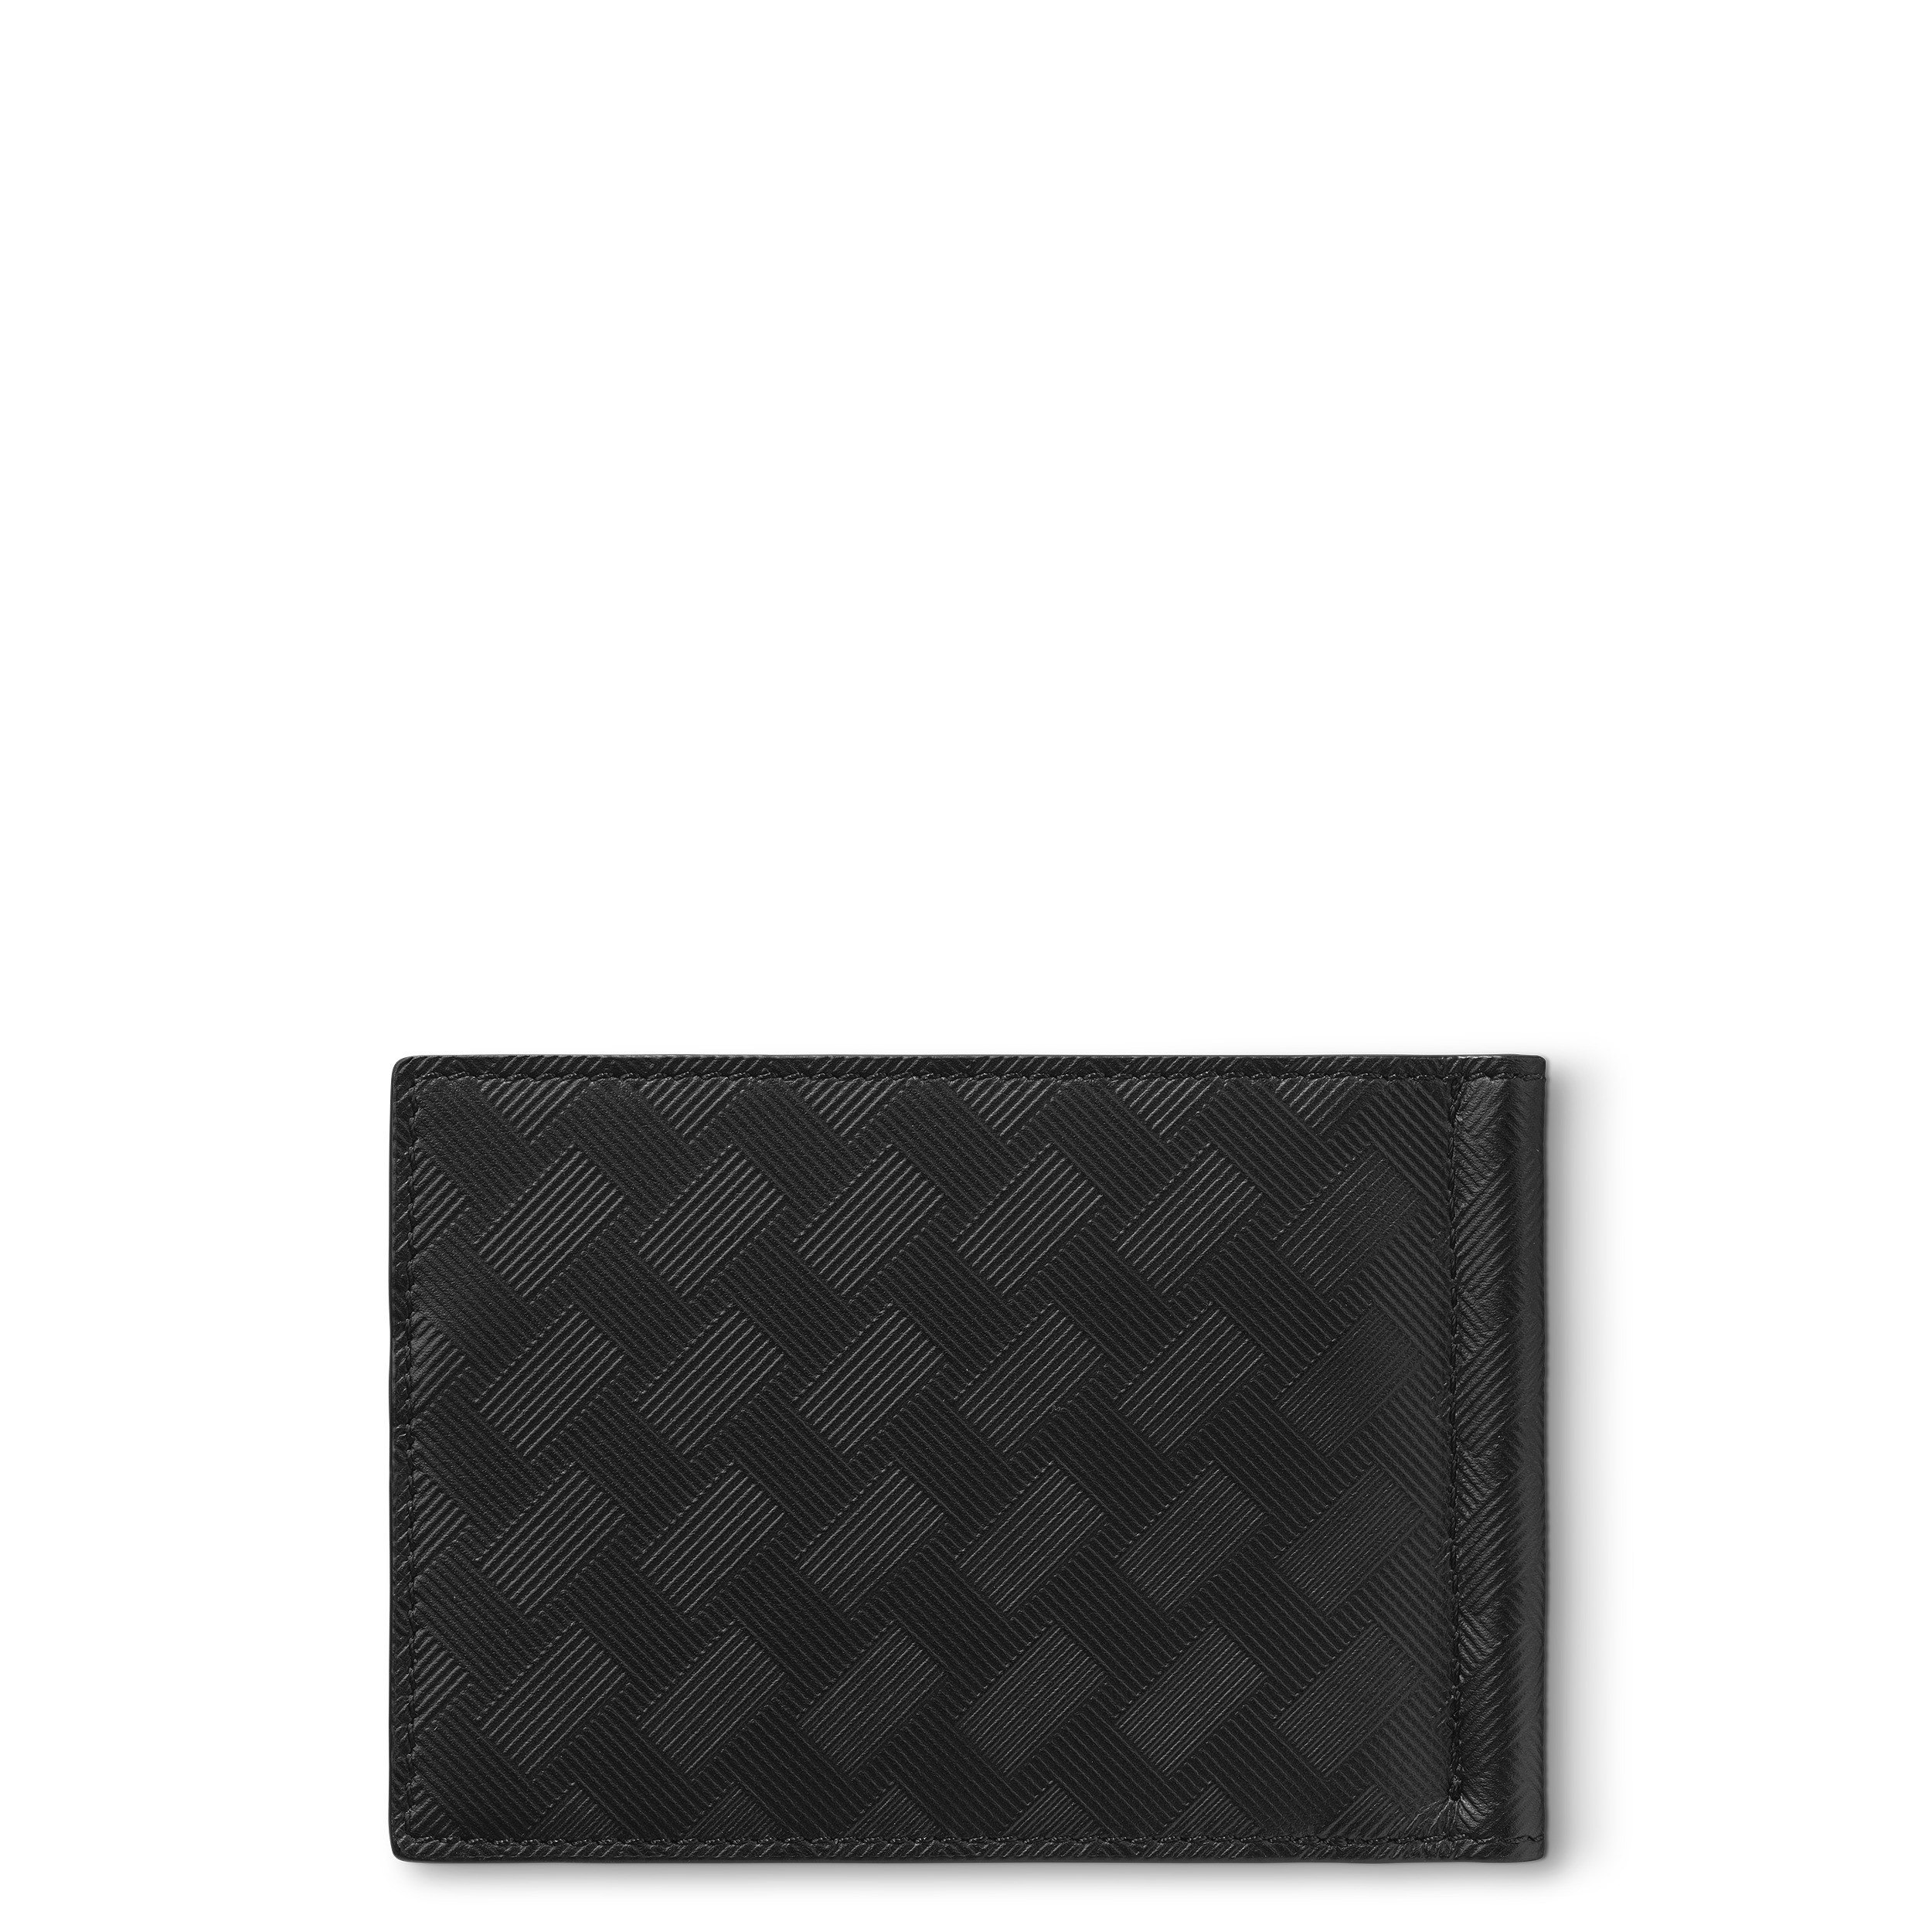 Montblanc Extreme 3.0 wallet 6cc with money clip, image 11